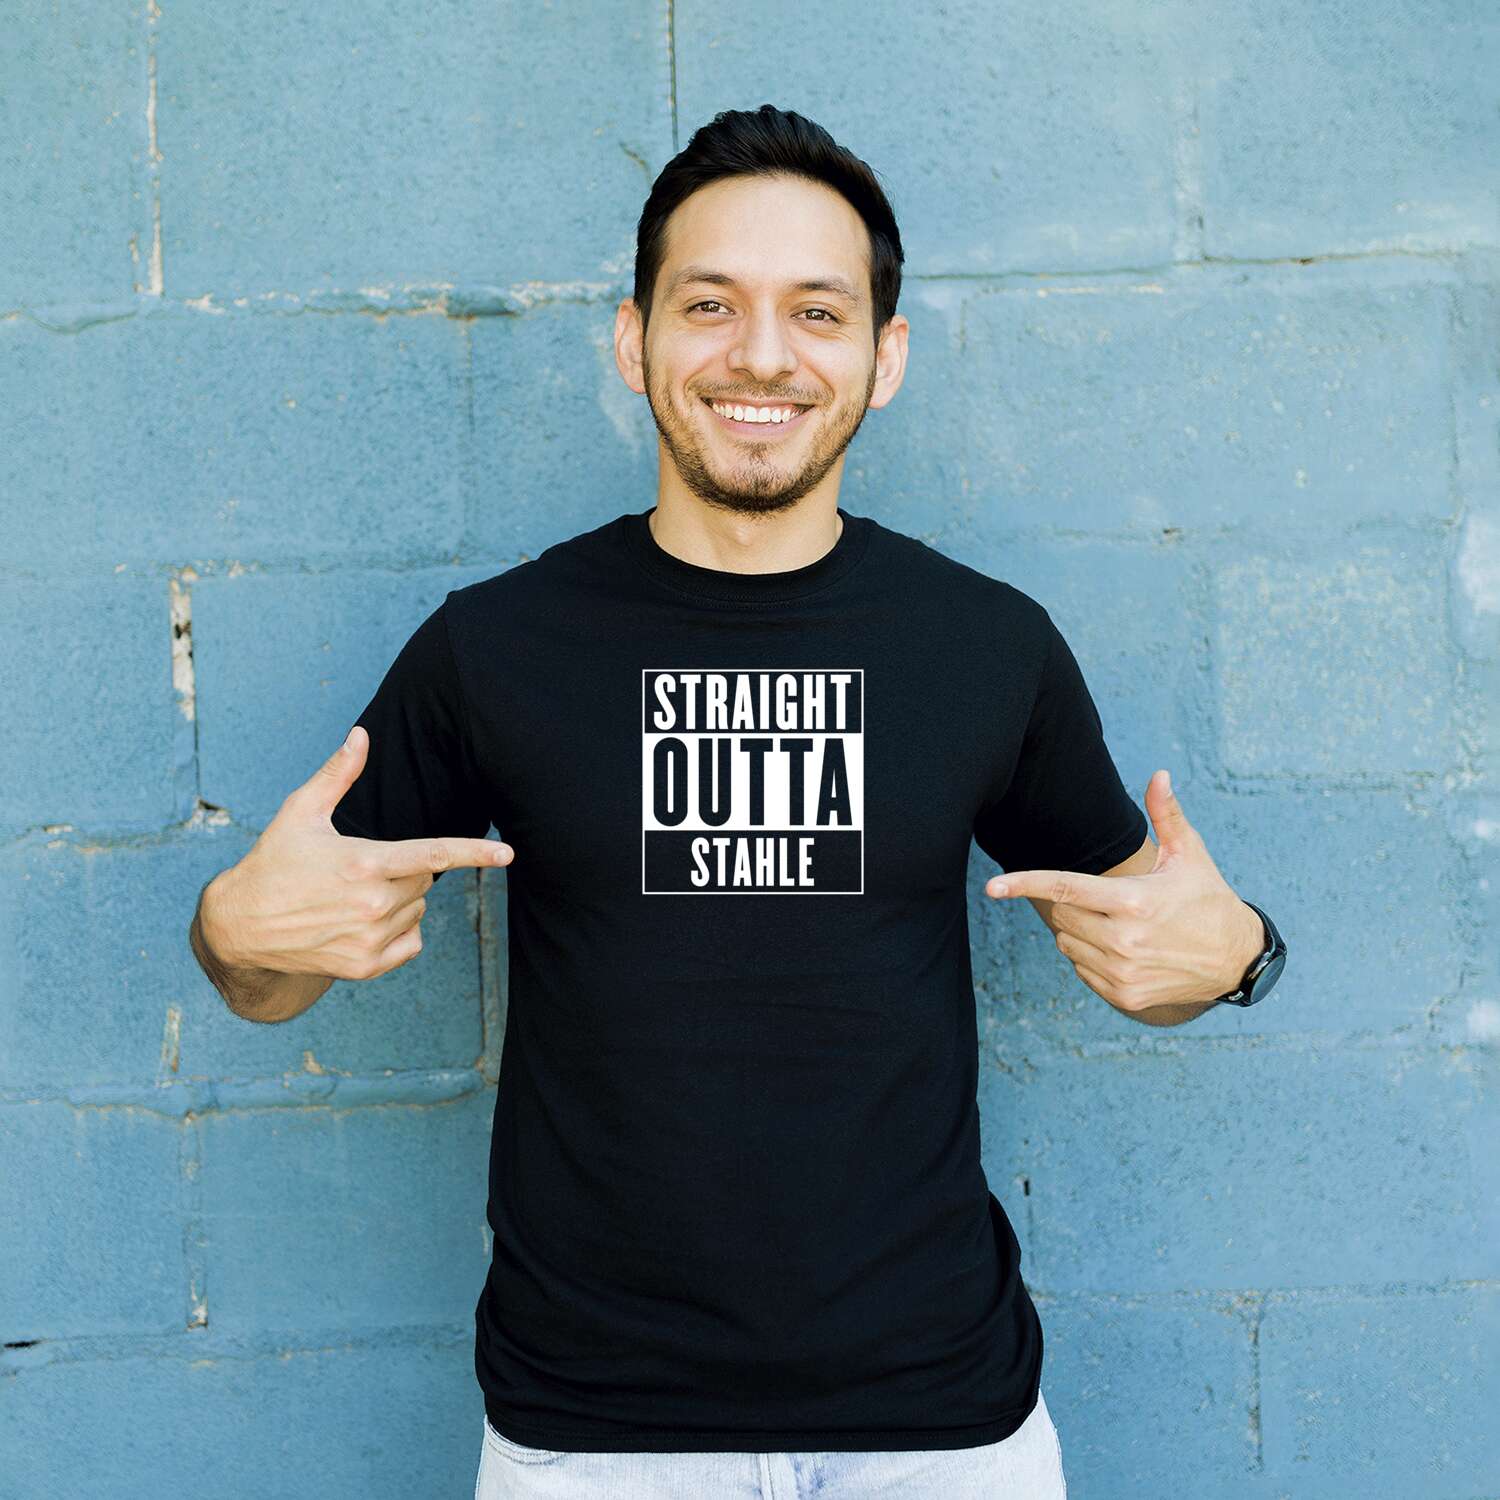 Stahle T-Shirt »Straight Outta«